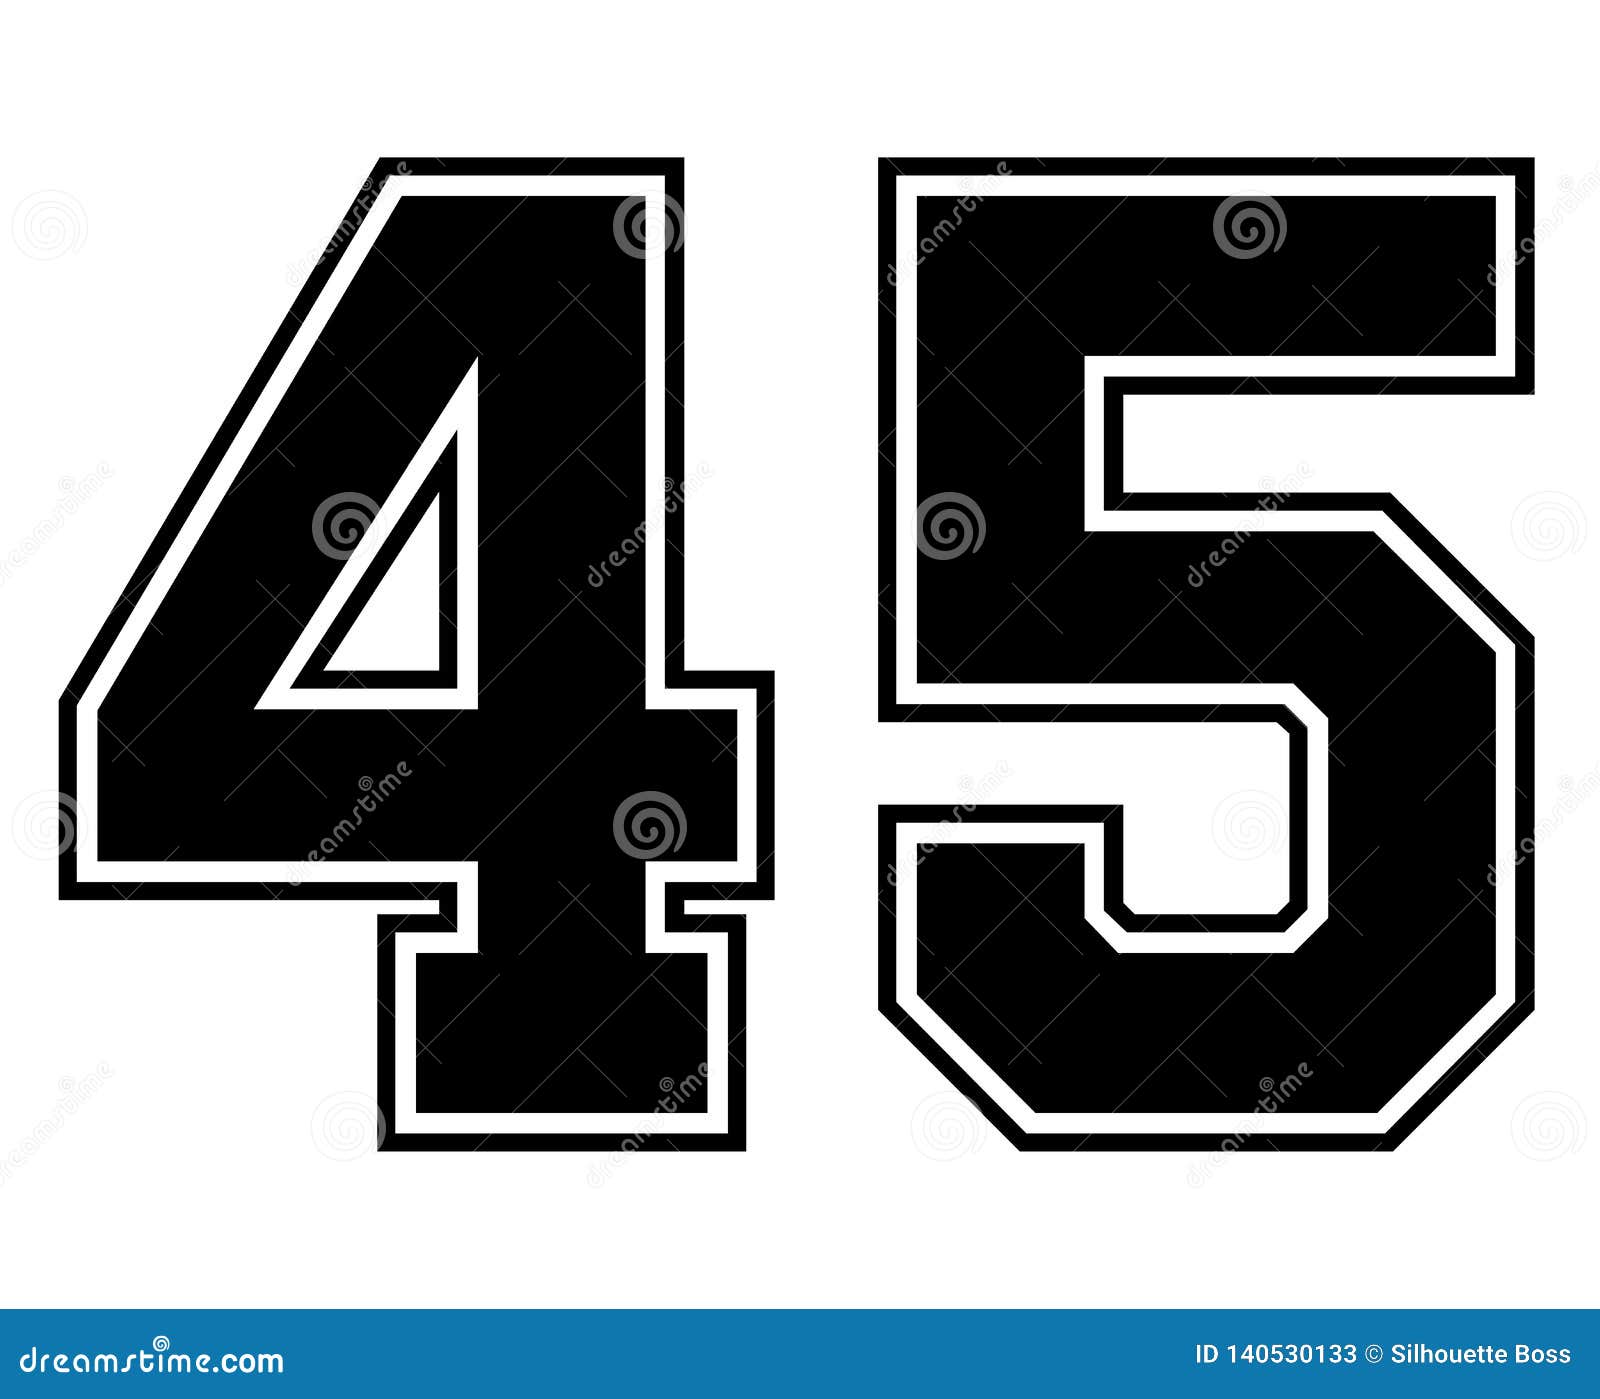 45 jersey number